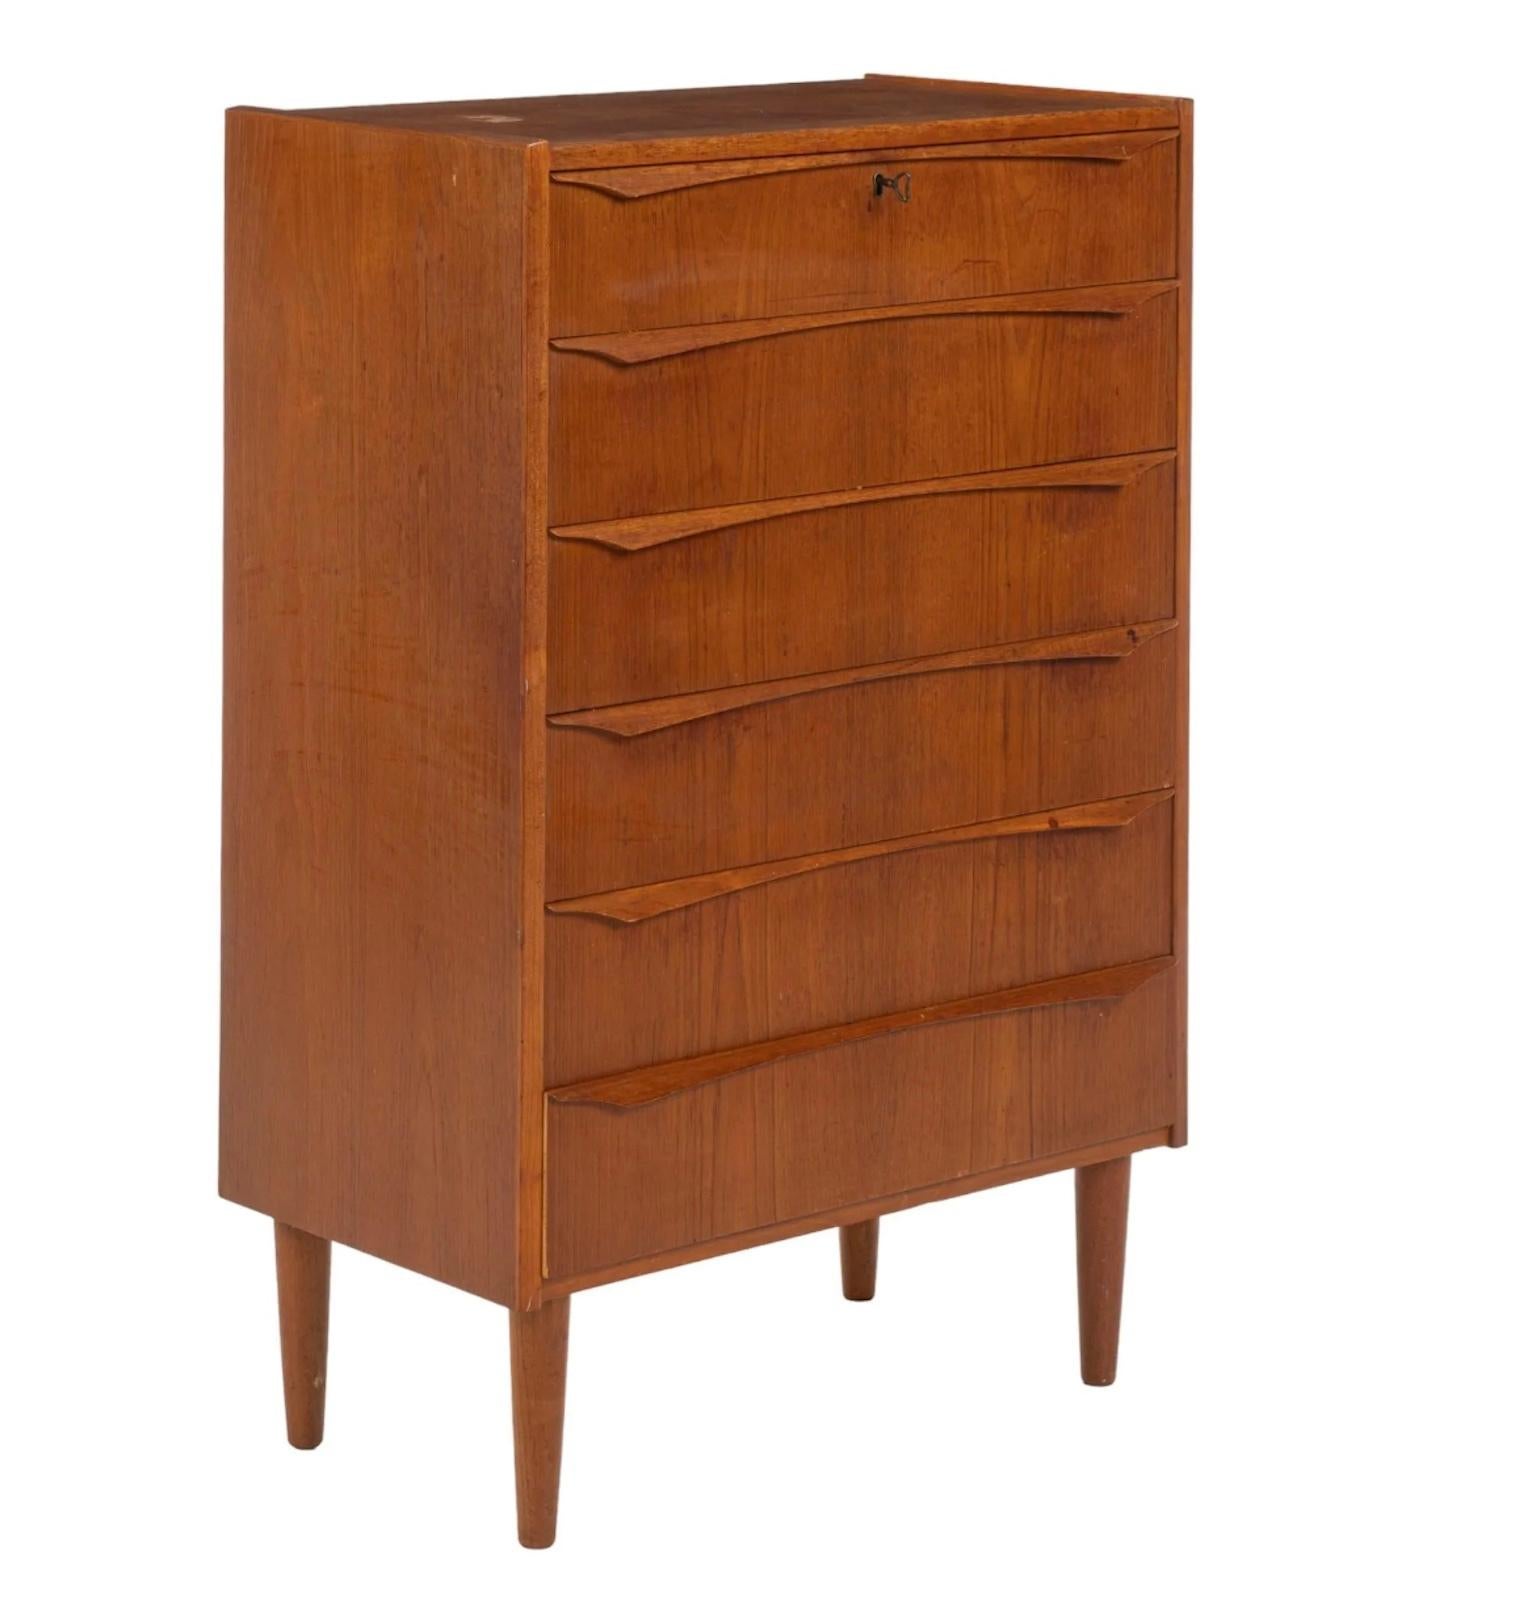 Danish Mid Century Teak Dresser with six drawers with wood pulls, with top drawer featuring key lock, supported on tapered legs, includes (1) key
 
 Measures height 43 in. x width 28 in. x depth 16 in.